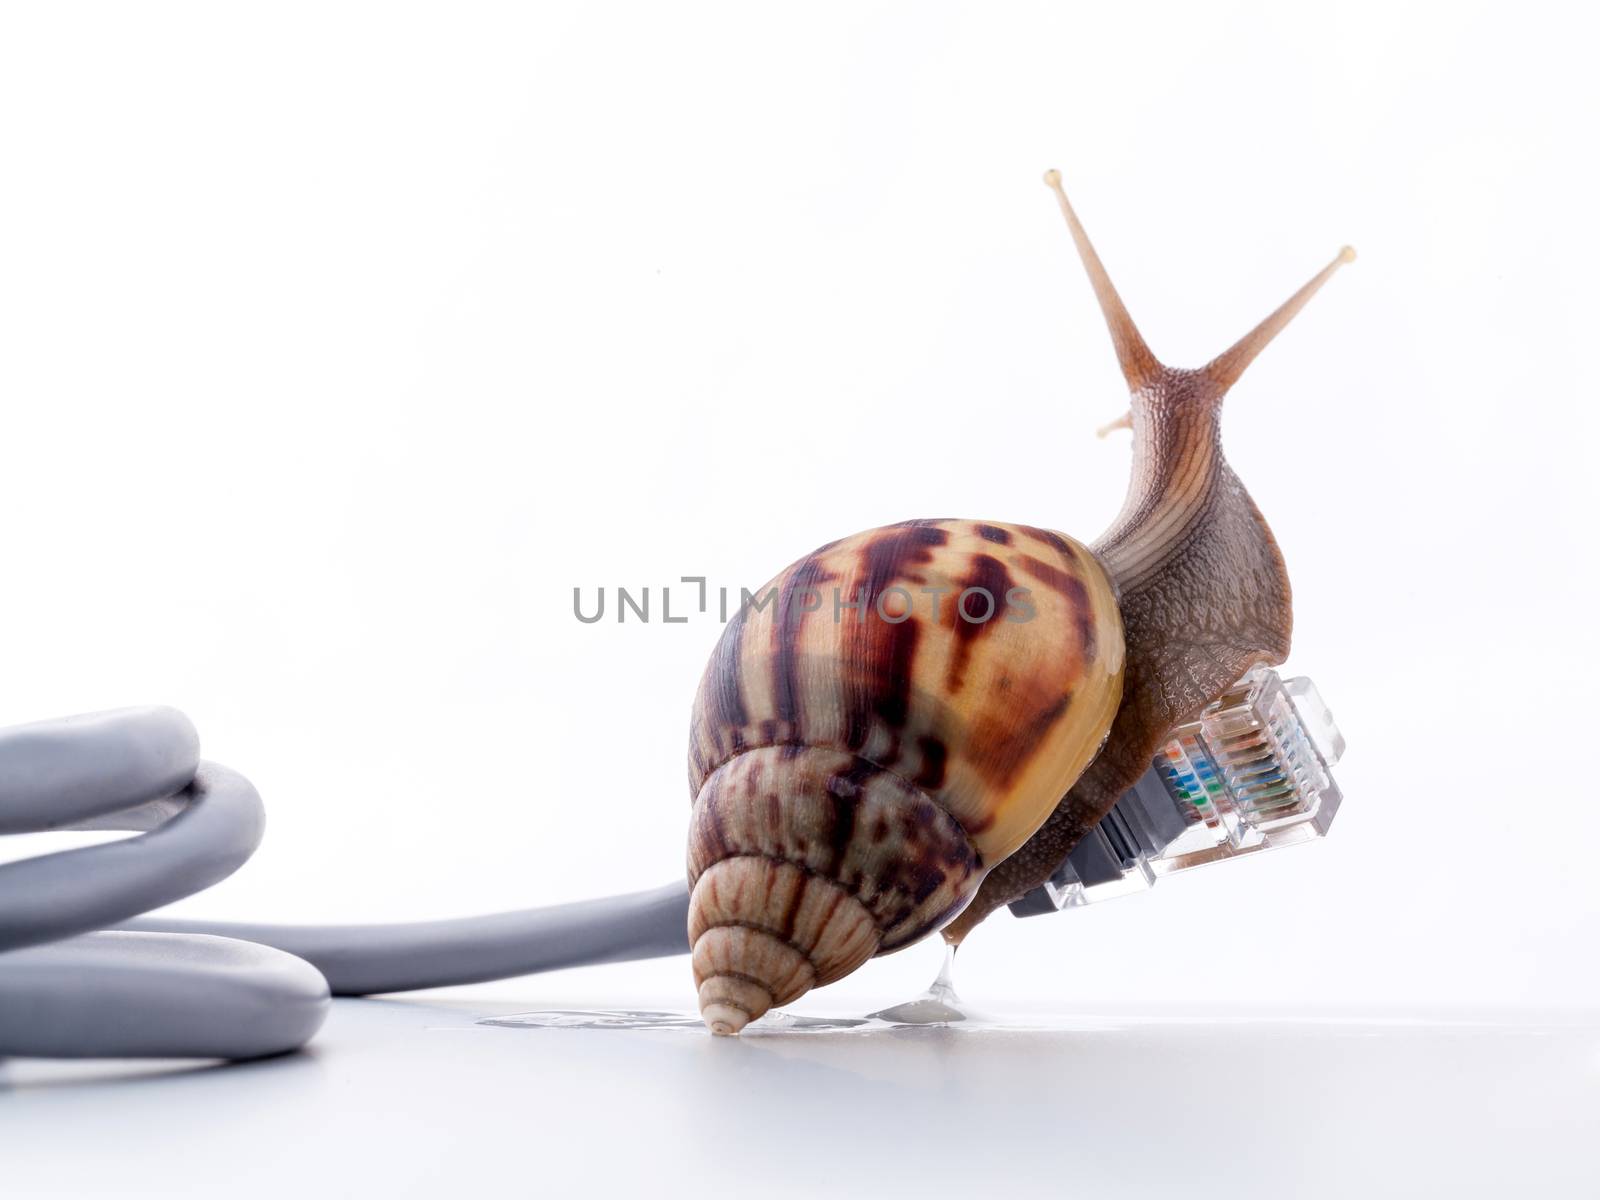 Snail with rj45 connector symbolic photo for slow internet conne by kerdkanno